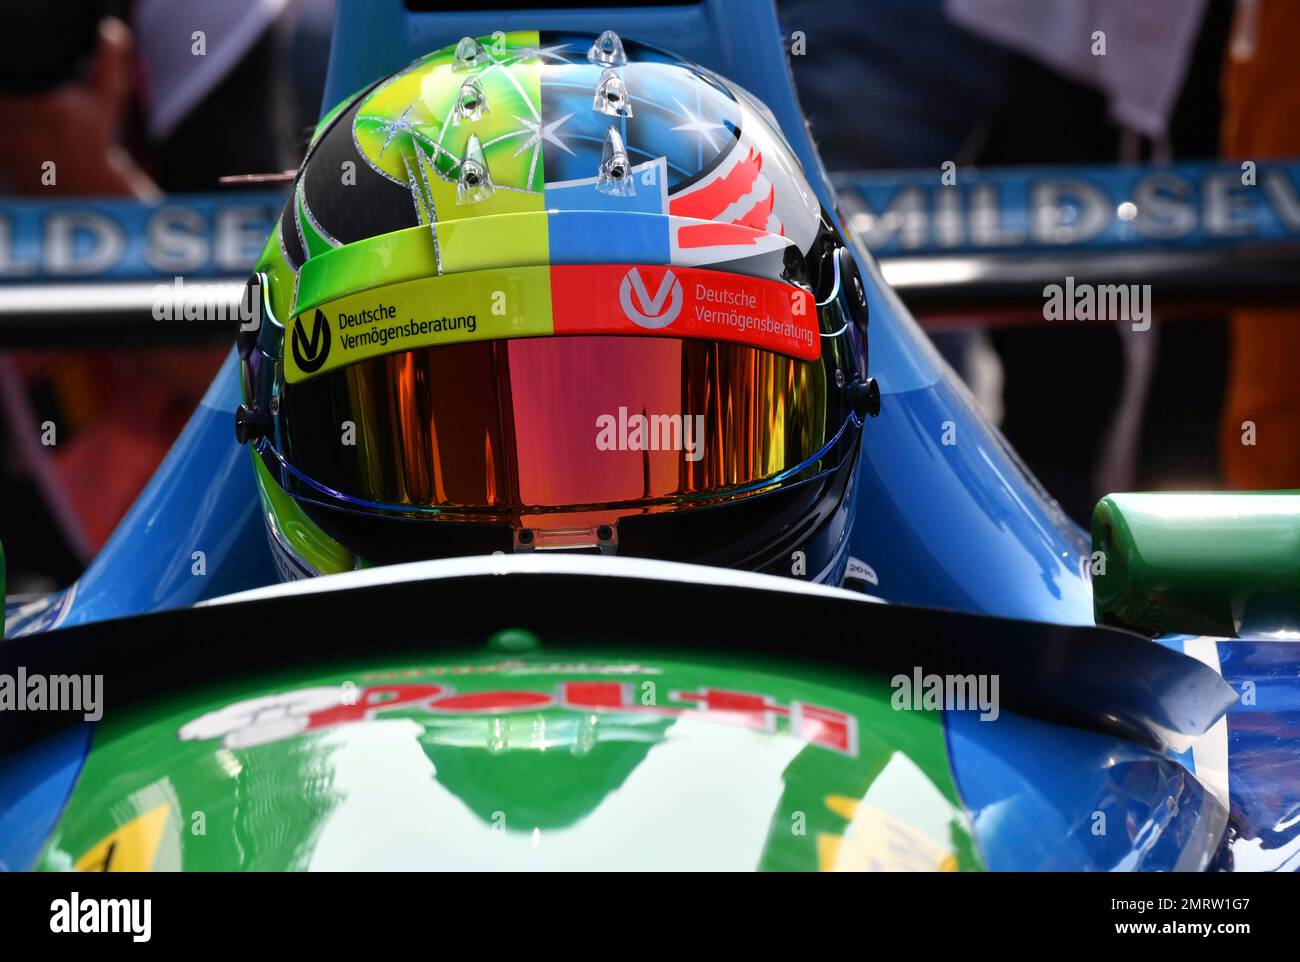 Mick Schumacher, son of seven-time F1 world champion Michael Schumacher,  sits in his car prior to an exhibition lap ahead of the Belgian Formula One  Grand Prix in Spa-Francorchamps, Belgium, Sunday, Aug.